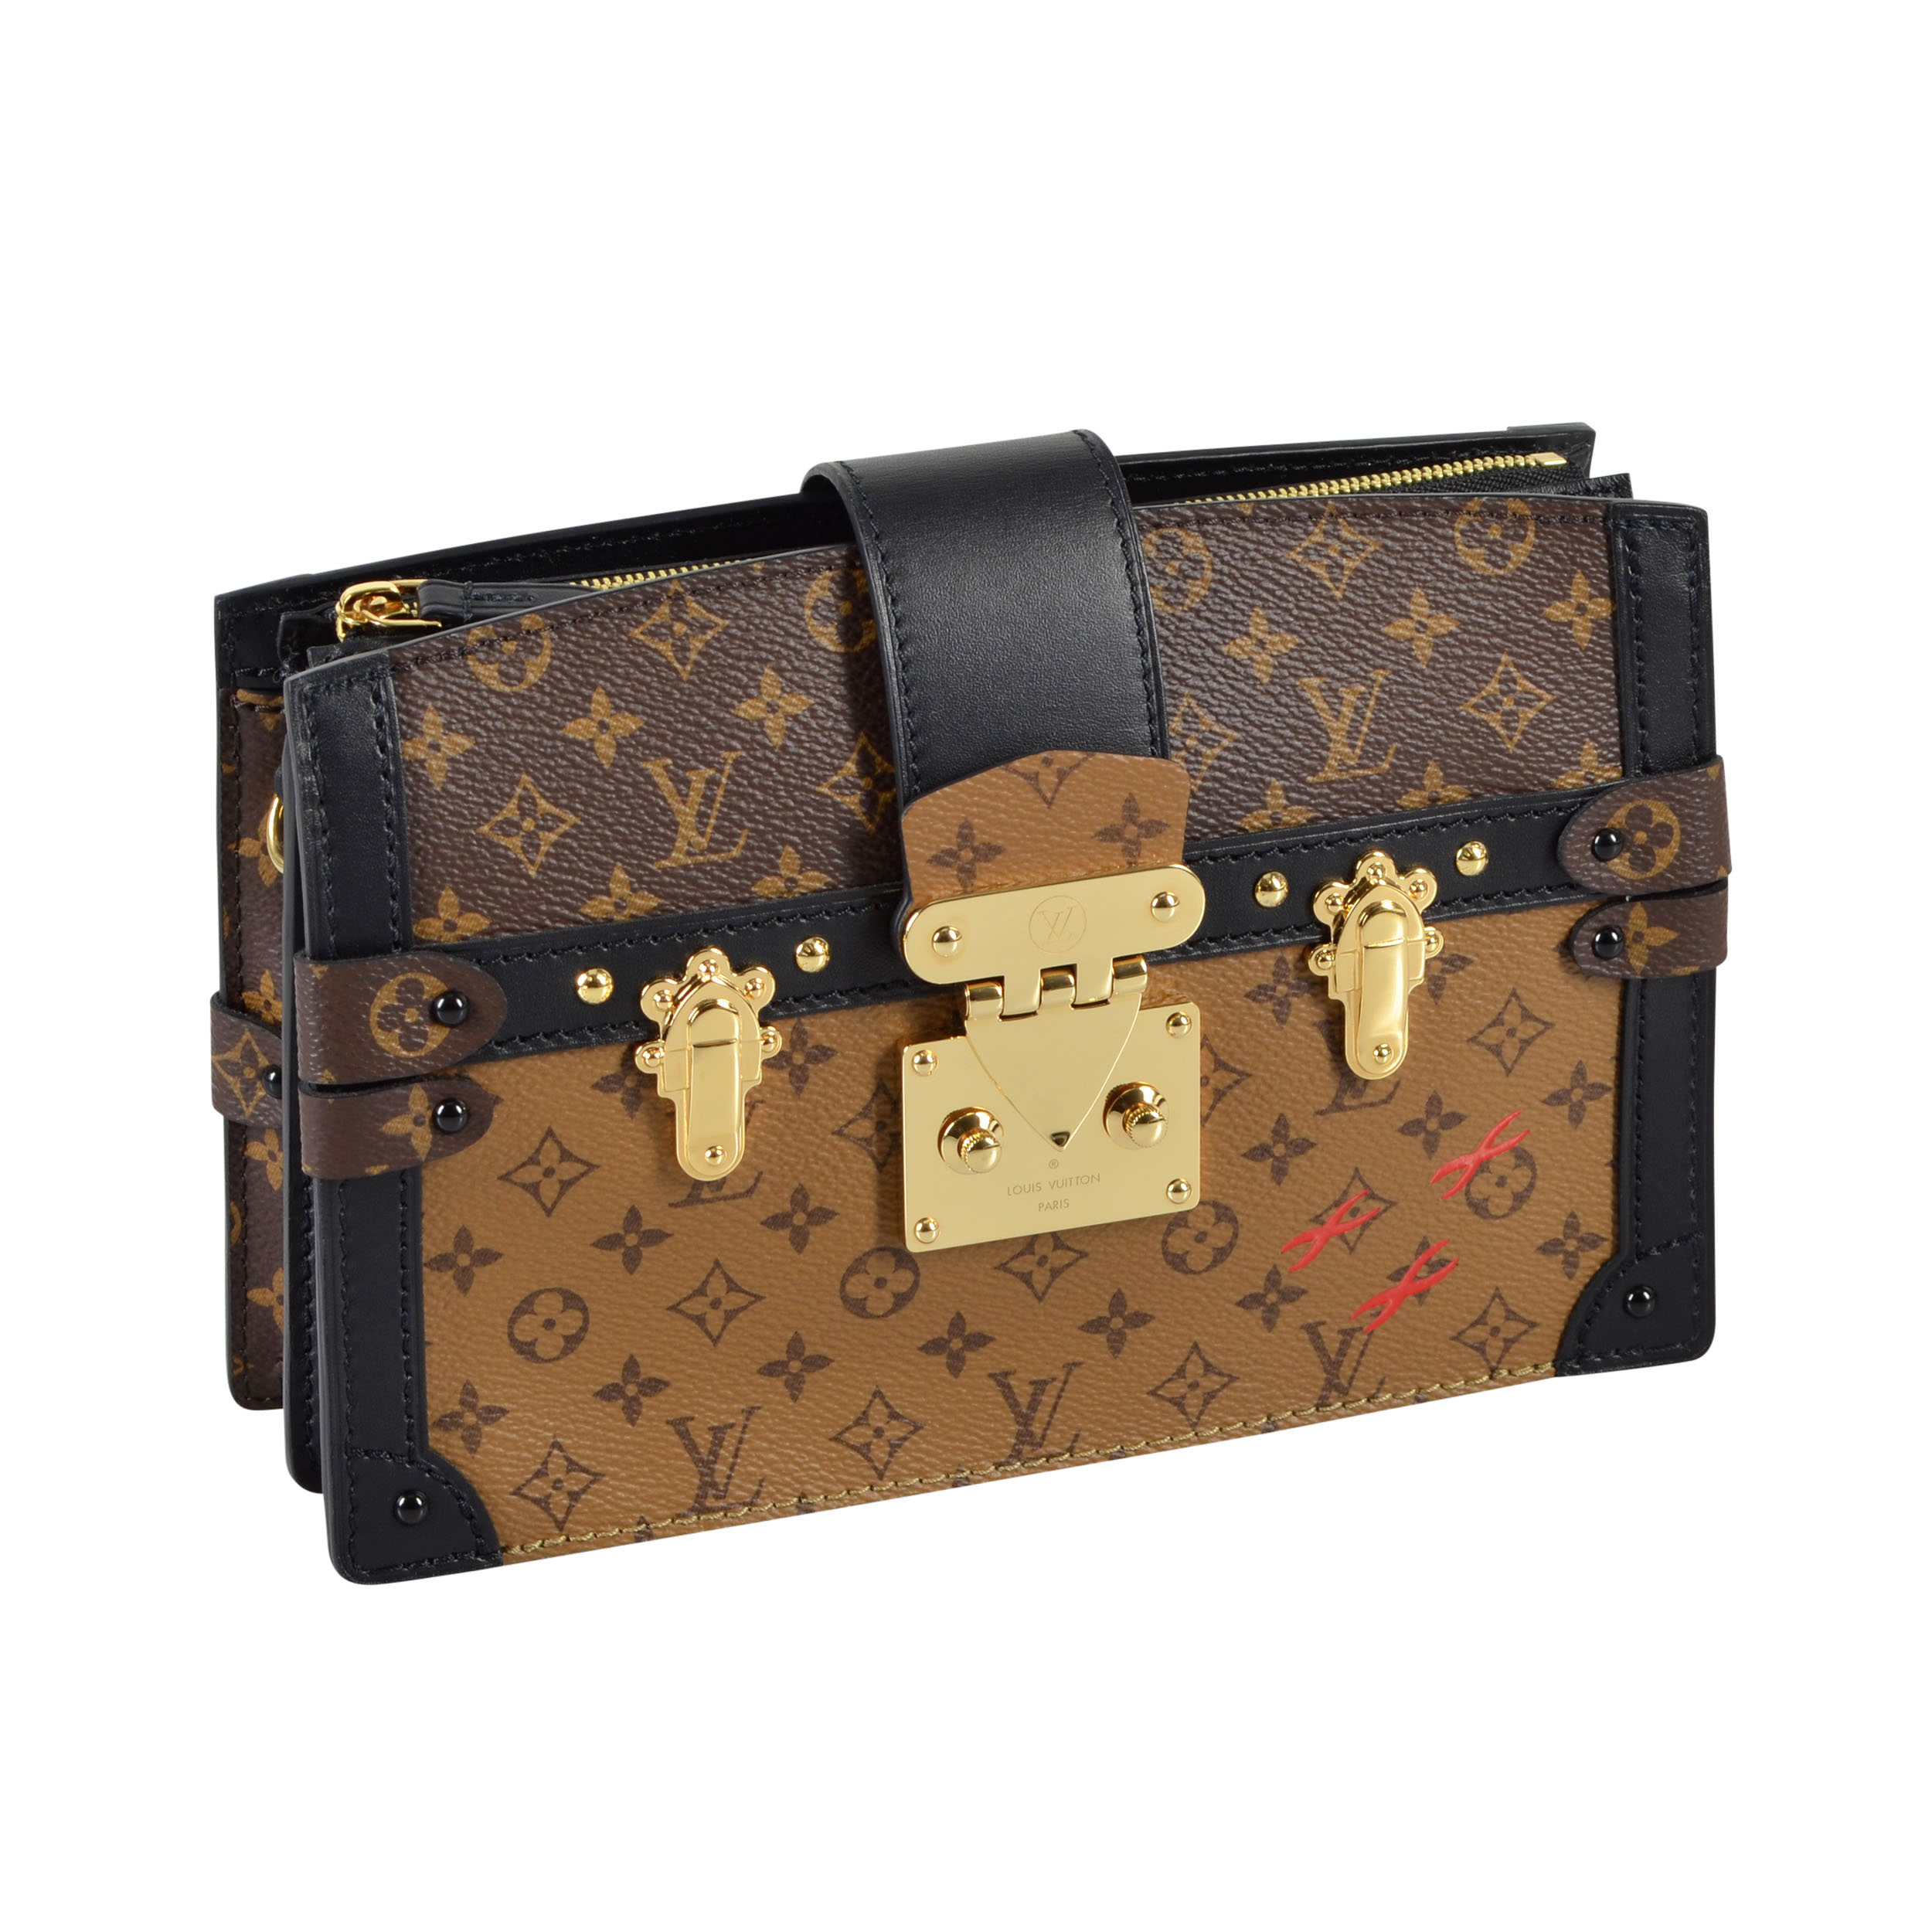 Louis Vuitton Clutch Box Trunk - 2 For Sale on 1stDibs